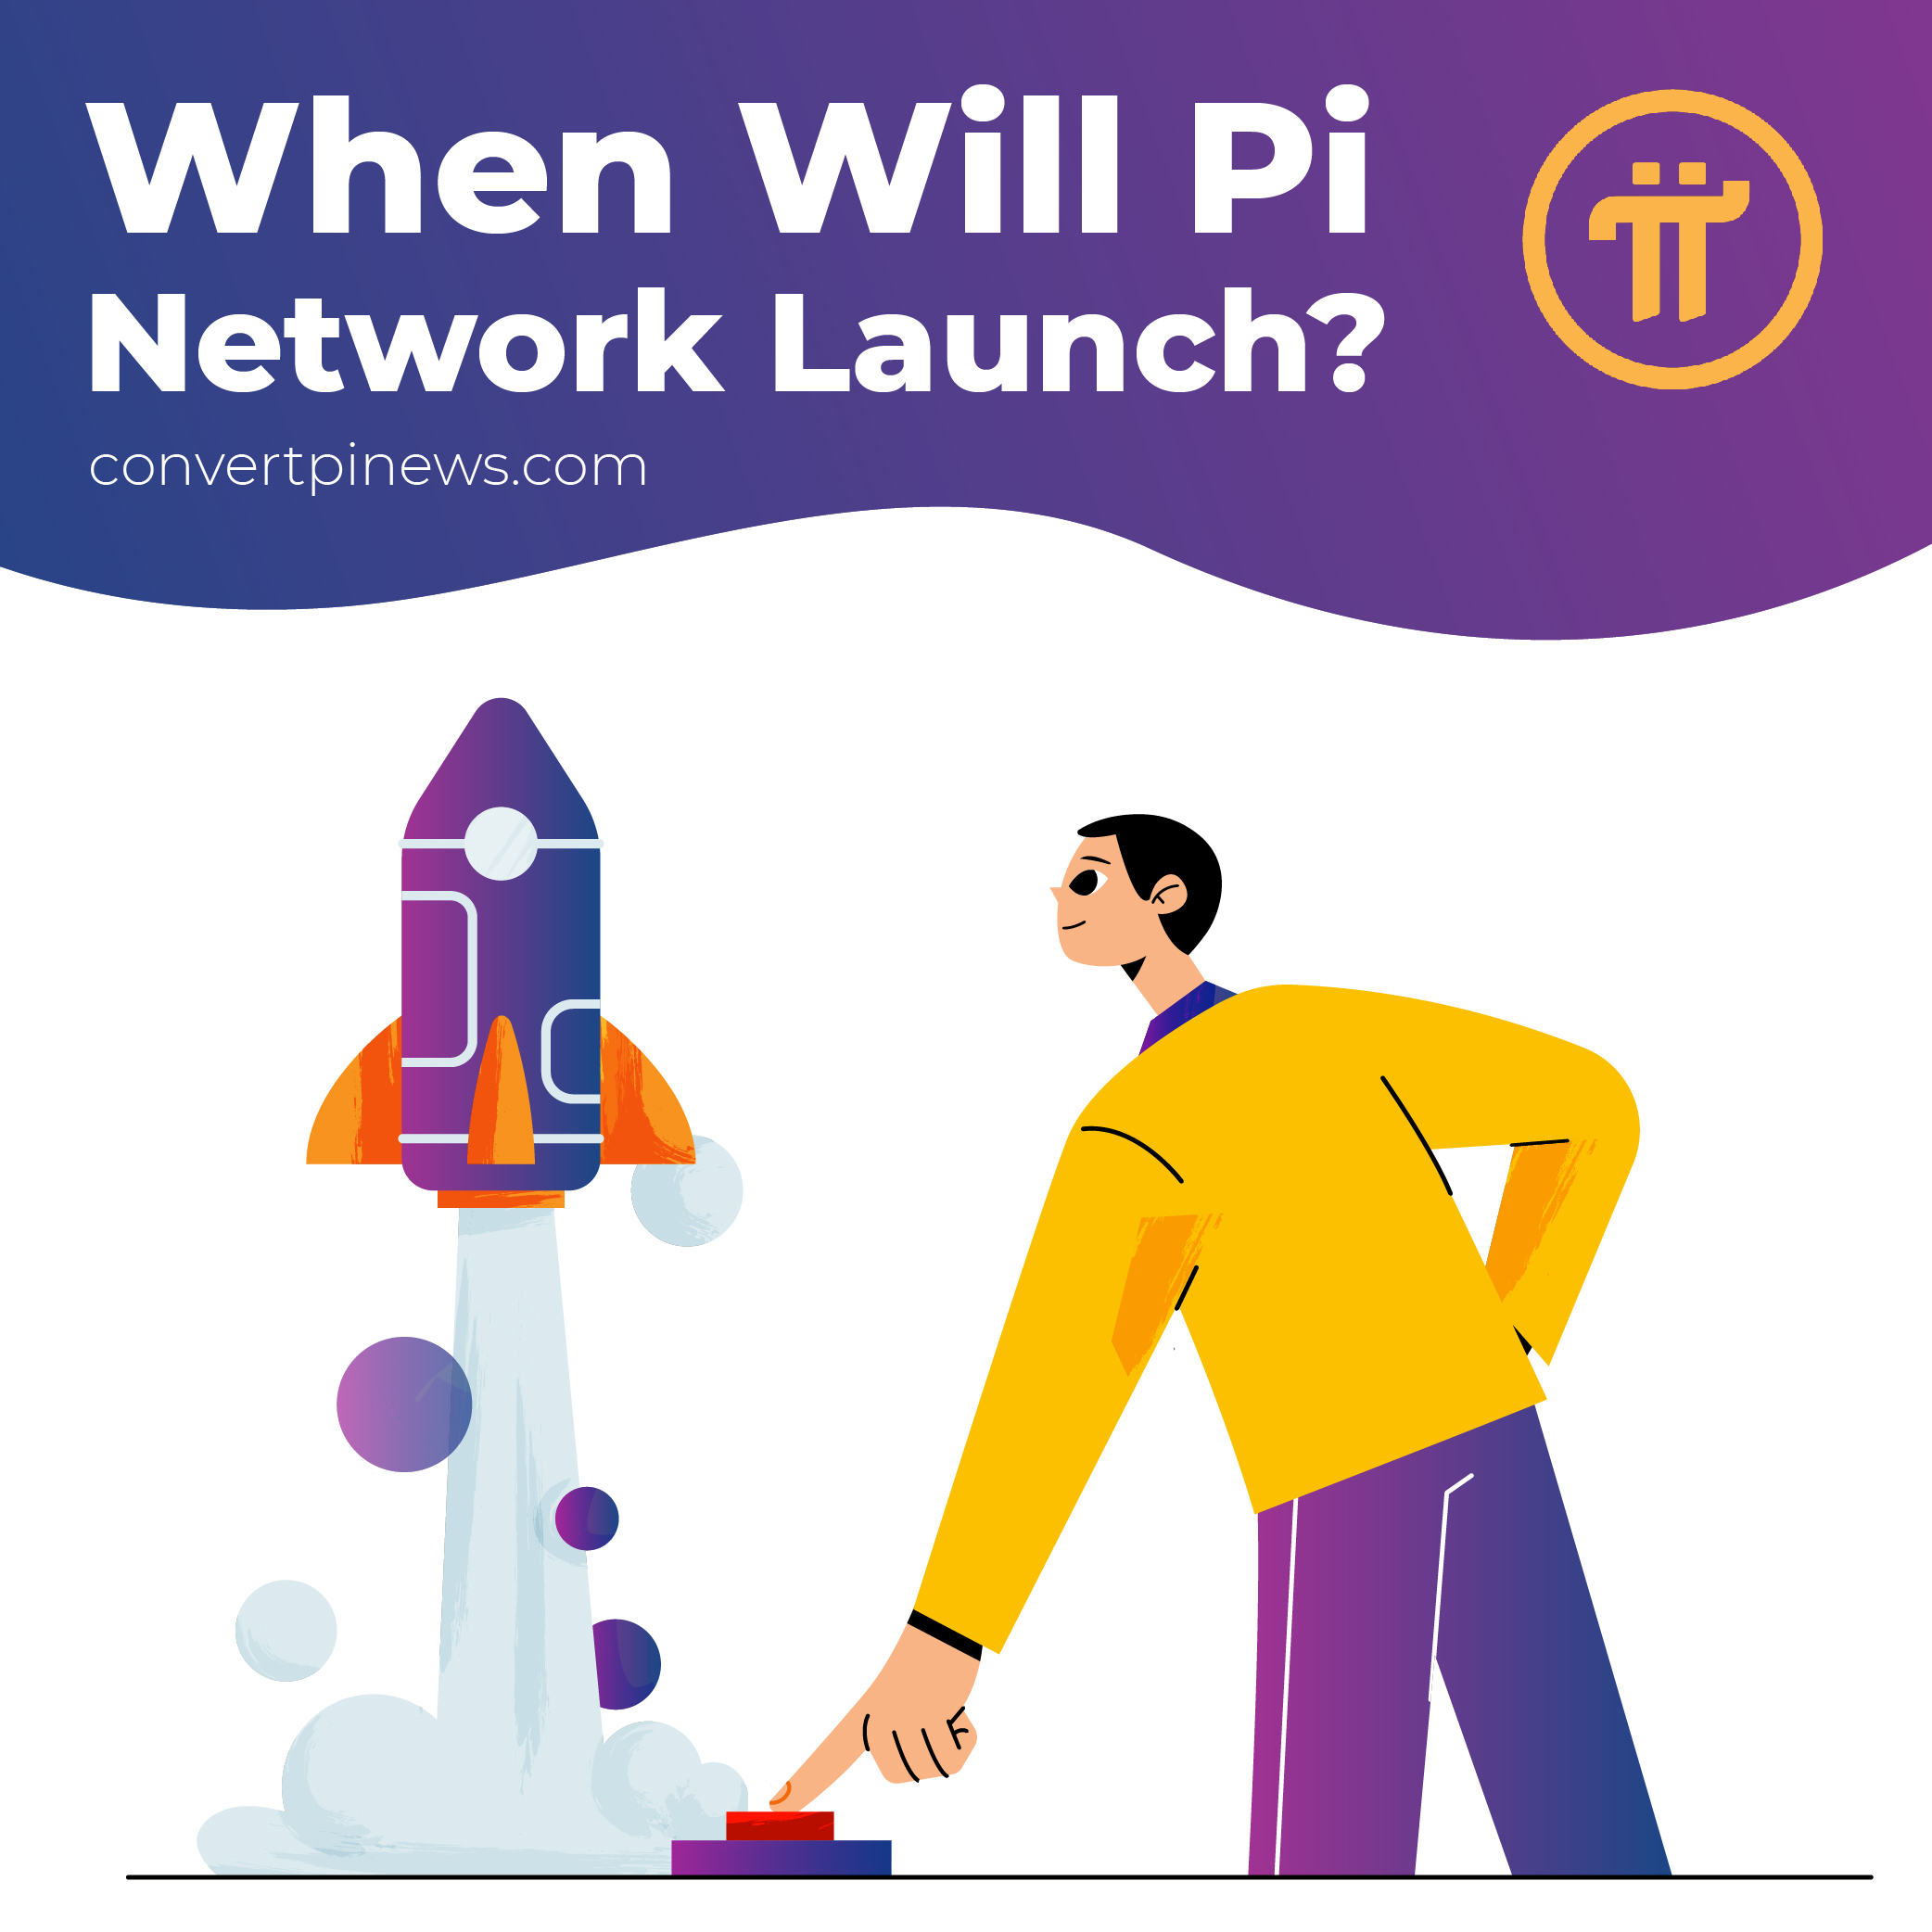 pi network launch